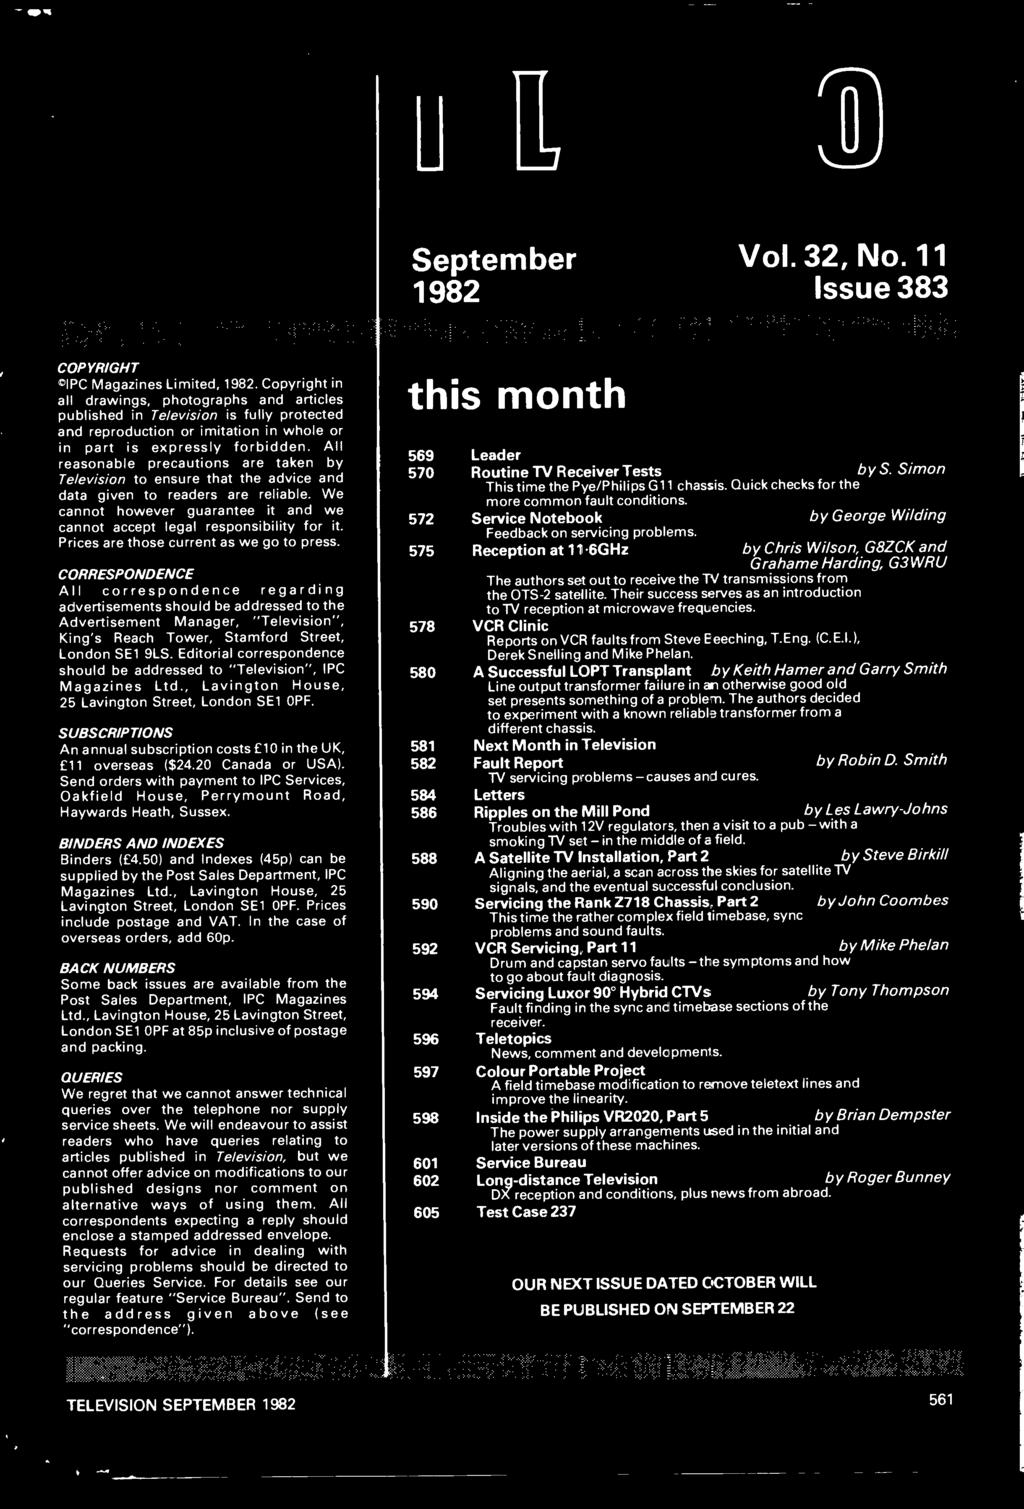 September 1982 Vol. 32, No. 11 Issue 383 COPYRIGHT IPC Magazines Limited, 1982.